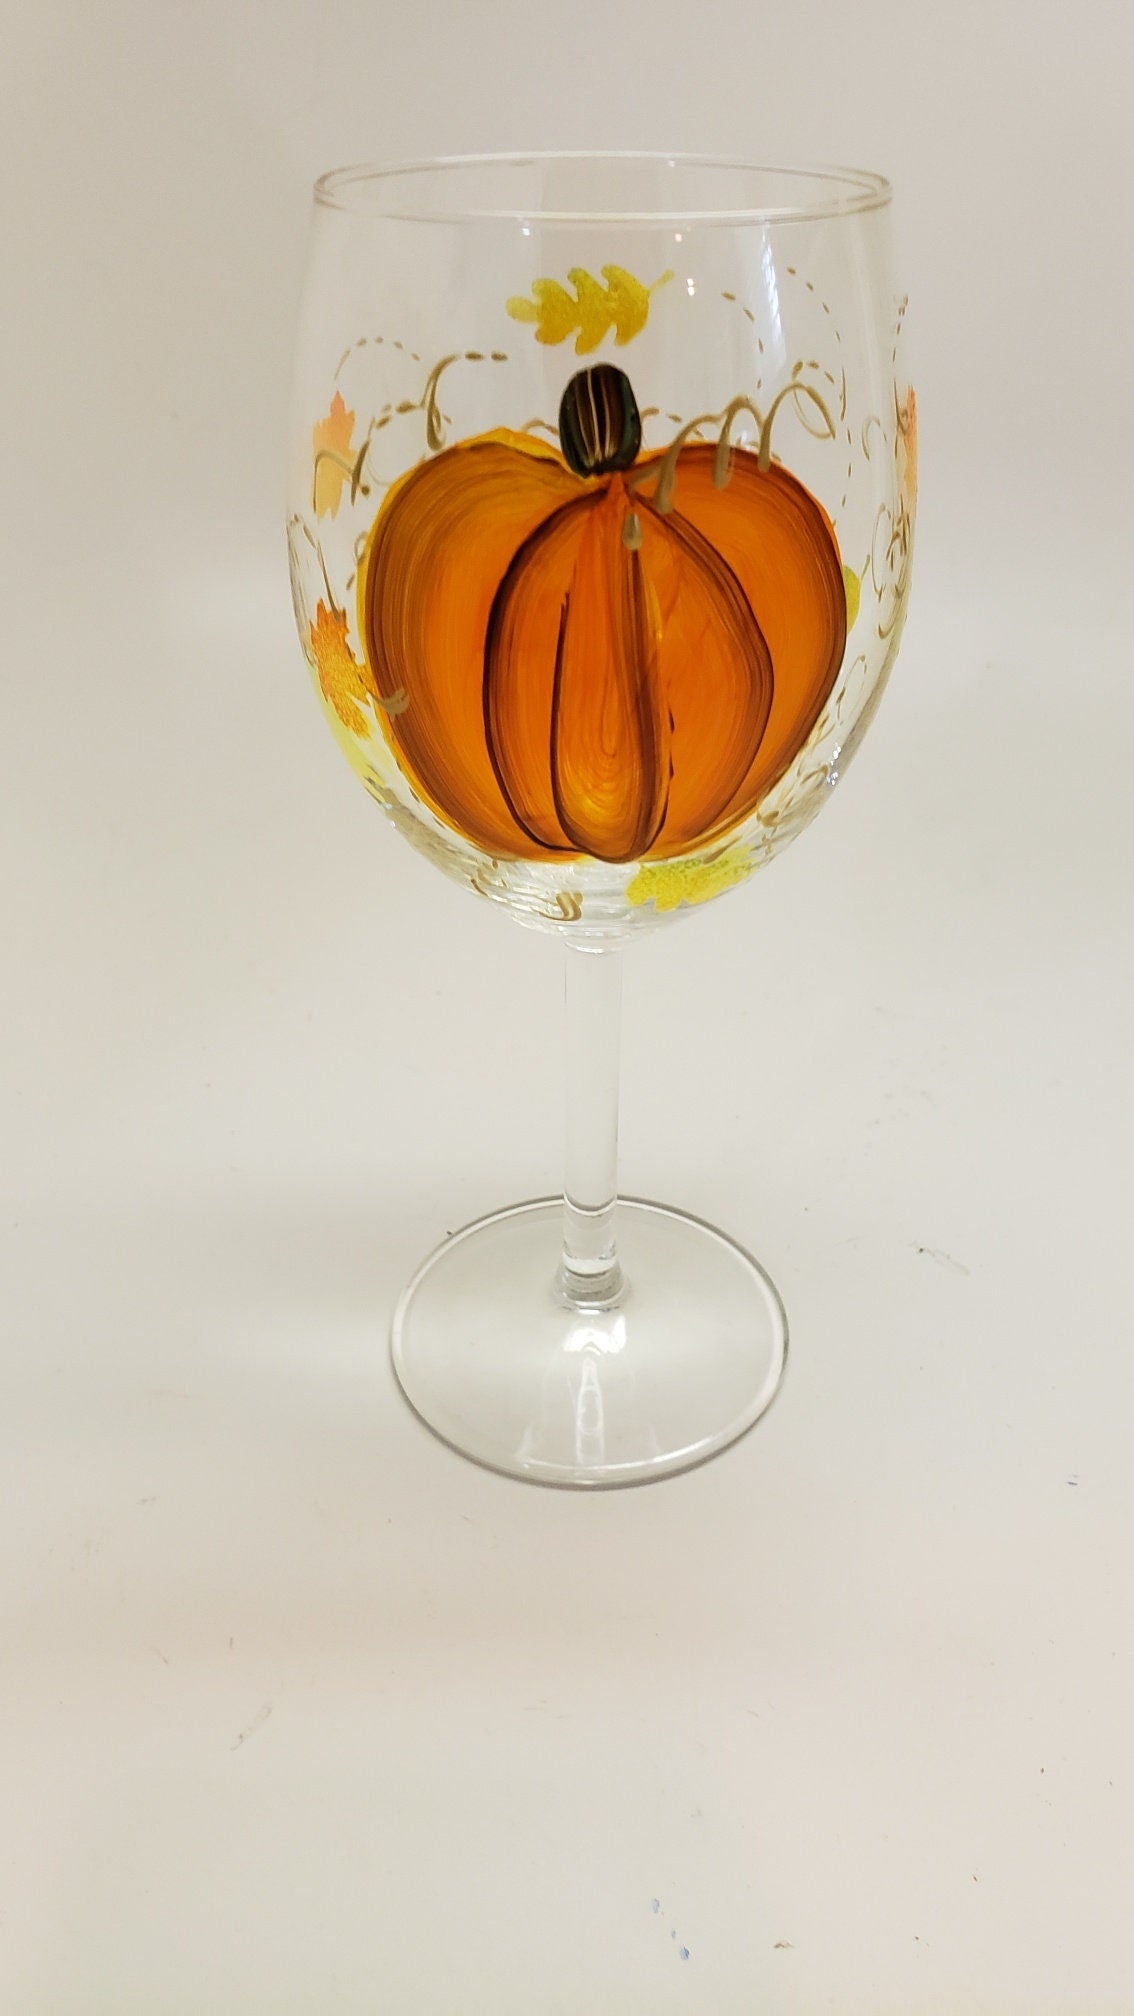 Hand Painted Wine Glasses with Pumpkin and fall leaves and golden swirls